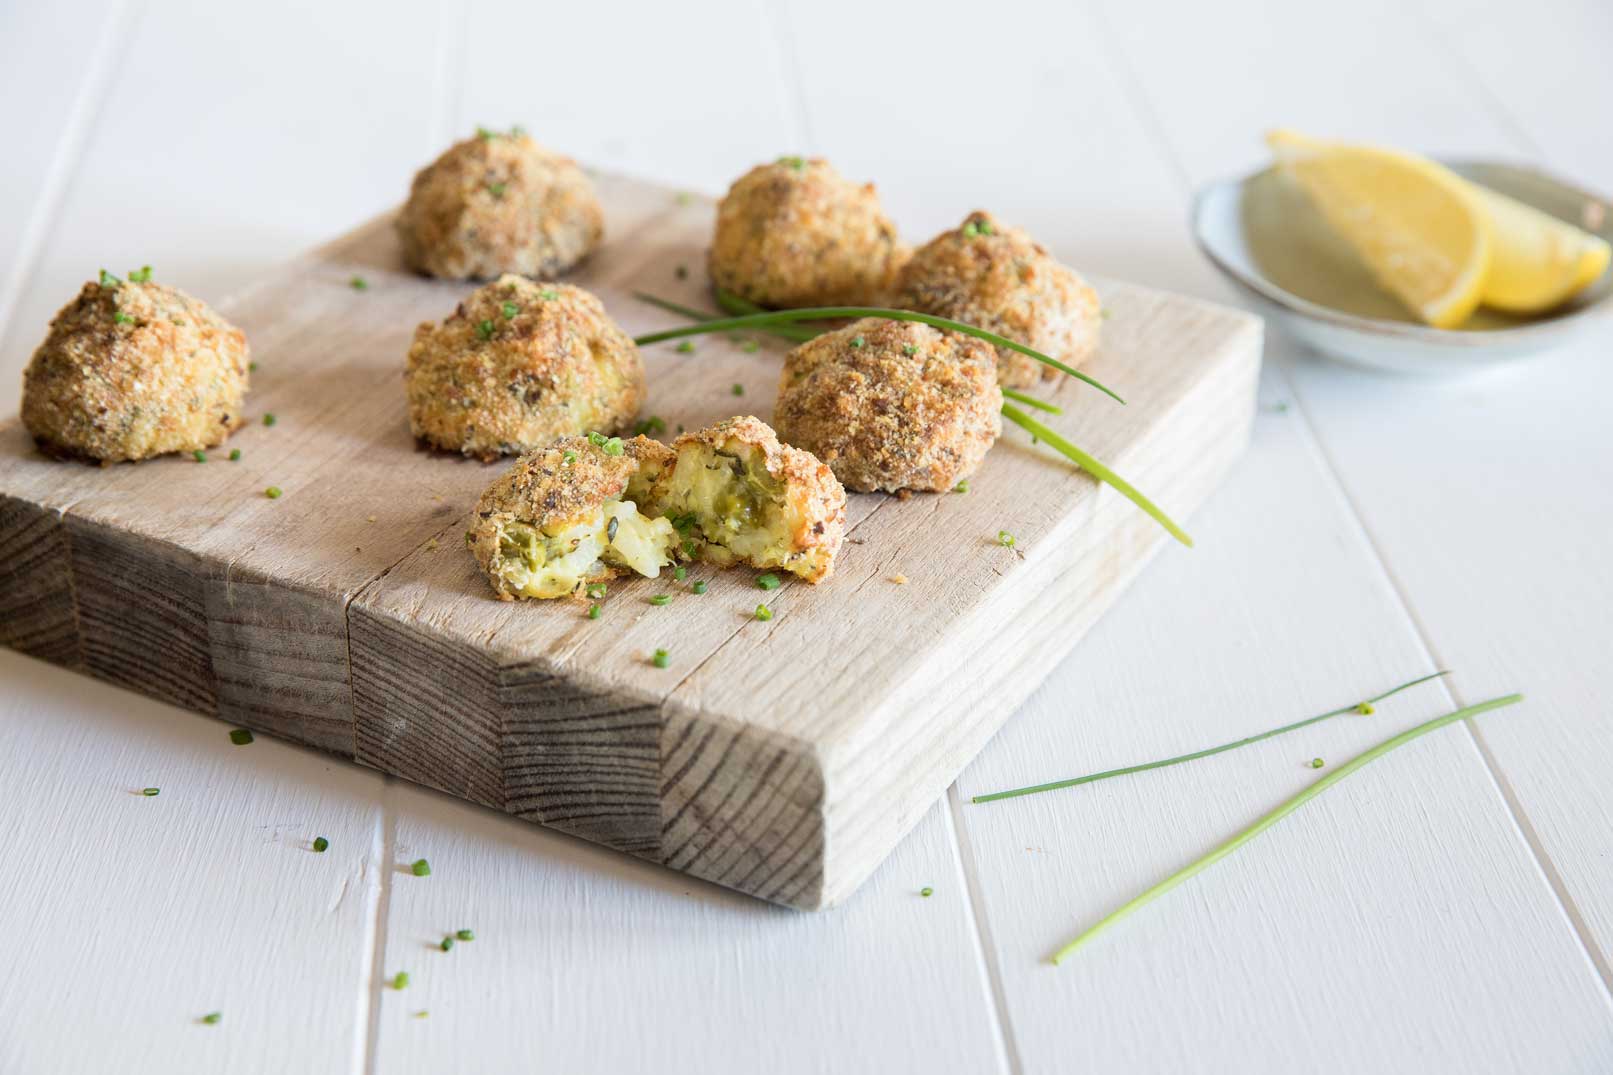 Cooked zucchini and cheese arancini balls served on a thick wooden cutting board with chives and a small dish of lemon wedges in the background for serving. 